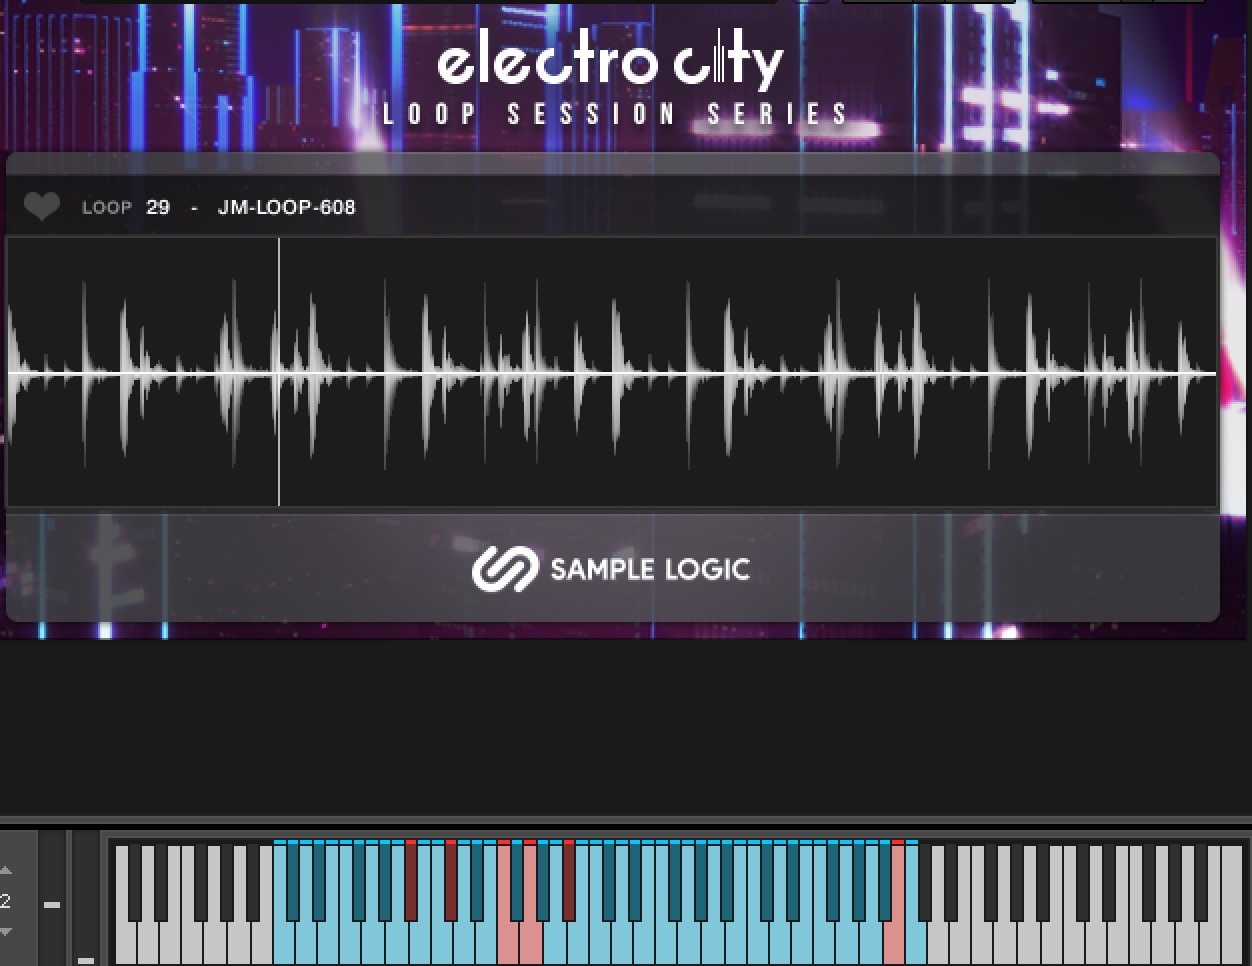 Loop Session Series: Electro City by Sample Logic LLC